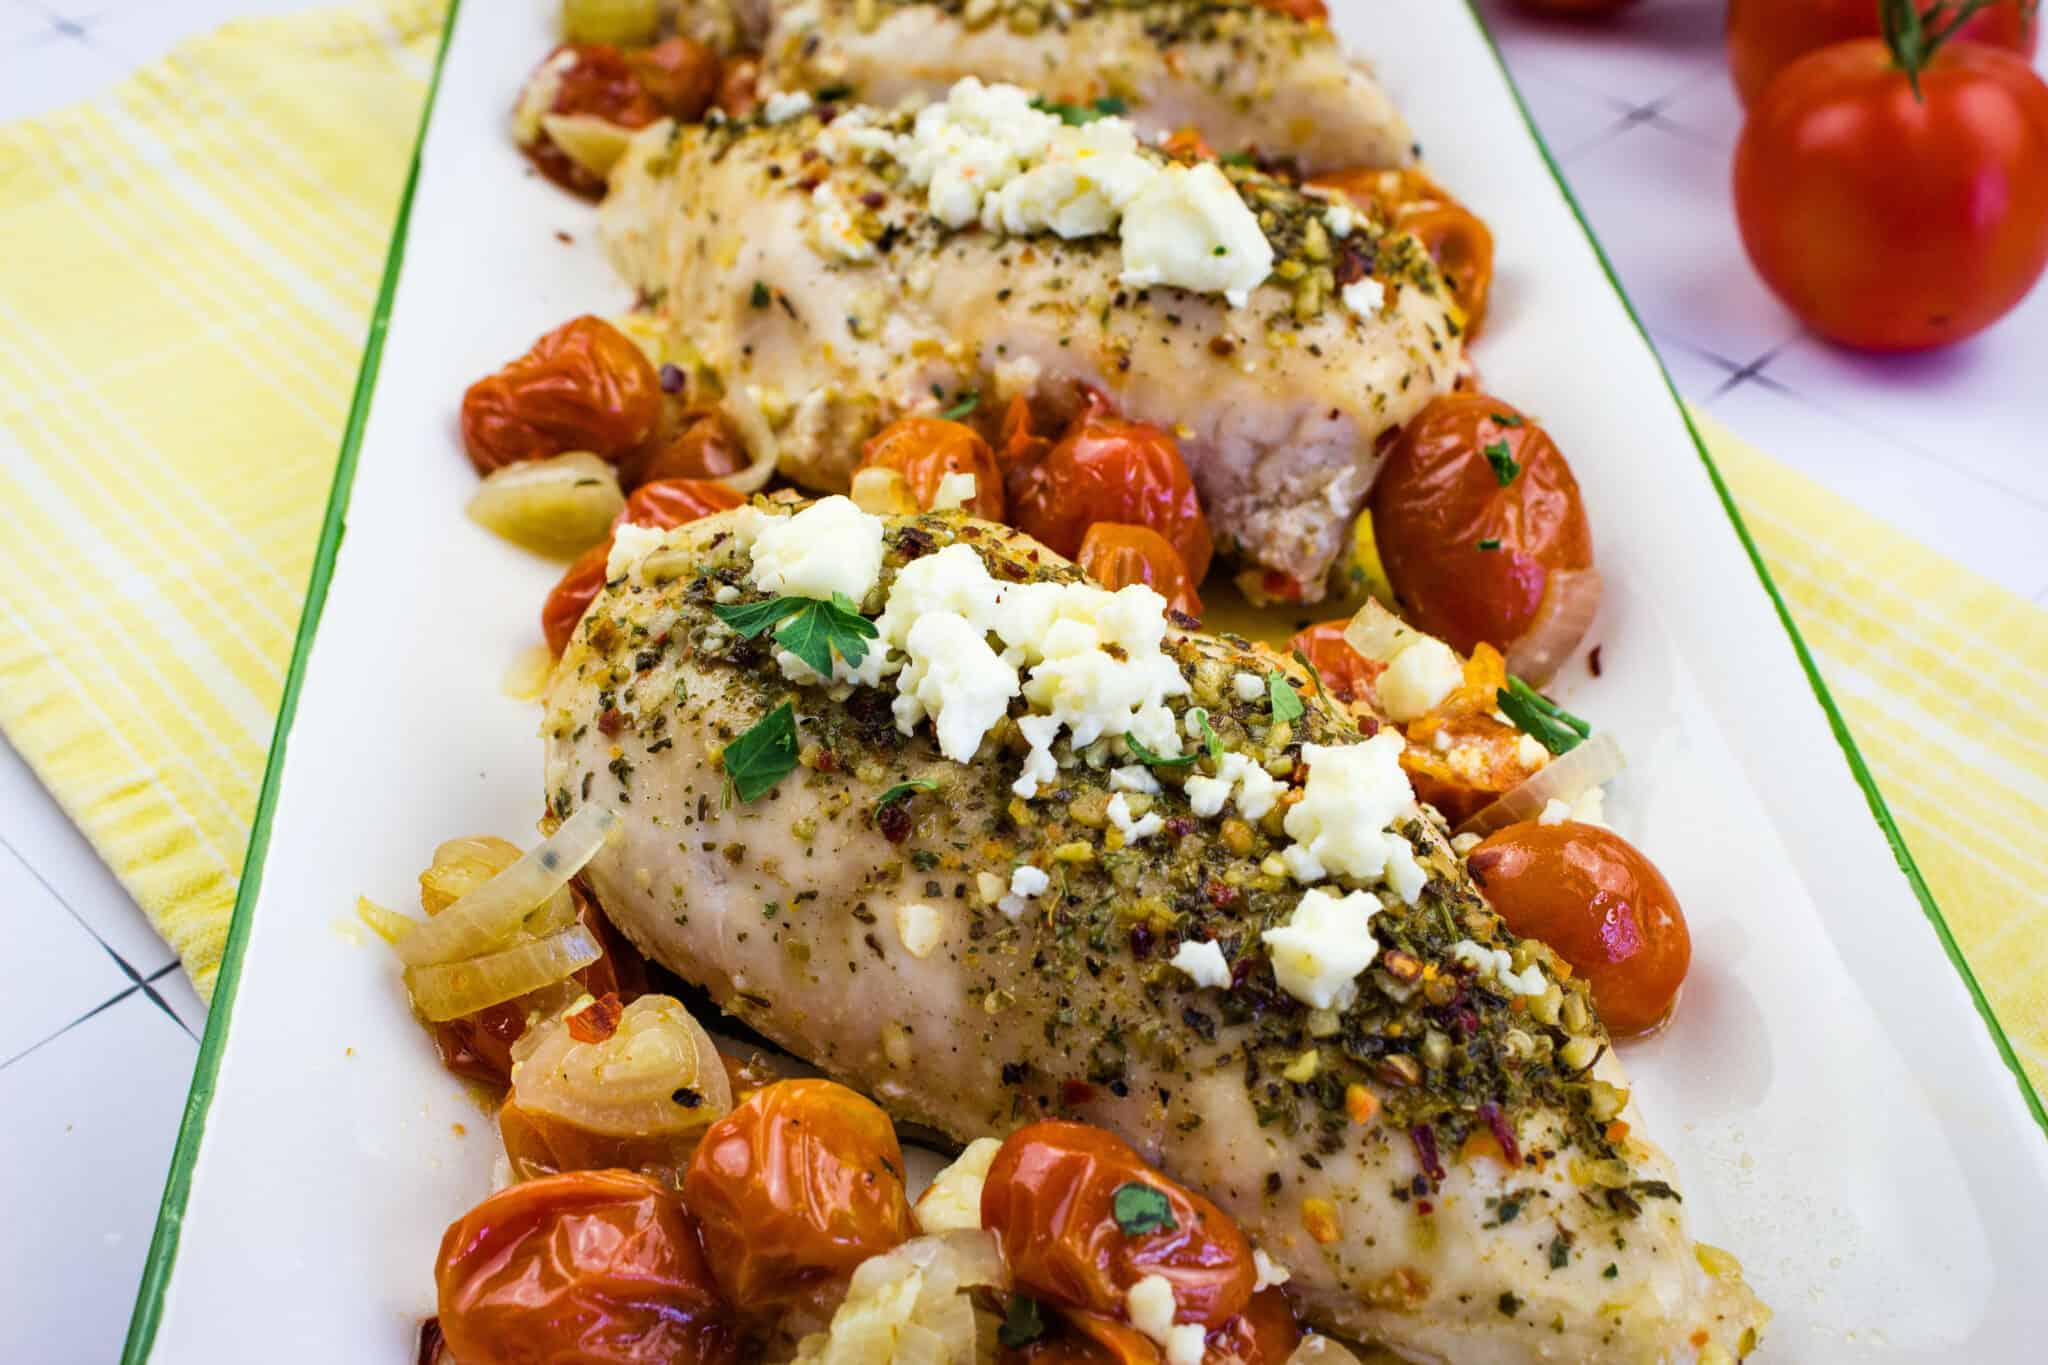 <p>If you’re looking for something a bit different this Easter, this chicken bake is a great pick. Mediterranean Chicken Bake is a standout dish that’s sure to impress. It’s packed with flavors that are both rich and refreshing, ideal for a hearty yet light brunch option.<br><strong>Get the Recipe: </strong><a href="https://cookwhatyoulove.com/mediterranean-chicken-bake-with-tomatoes-feta/?utm_source=msn&utm_medium=page&utm_campaign=15%20easter%20brunch%20ideas%20that%20aren't%20just%20eggs">Mediterranean Chicken Bake</a></p> <p>The post <a href="https://allthebestspots.com/easter-brunch-ideas/">15 Easter Brunch Ideas That Aren’t Just Eggs</a> appeared first on <a href="https://allthebestspots.com">All the Best Spots</a>.</p>